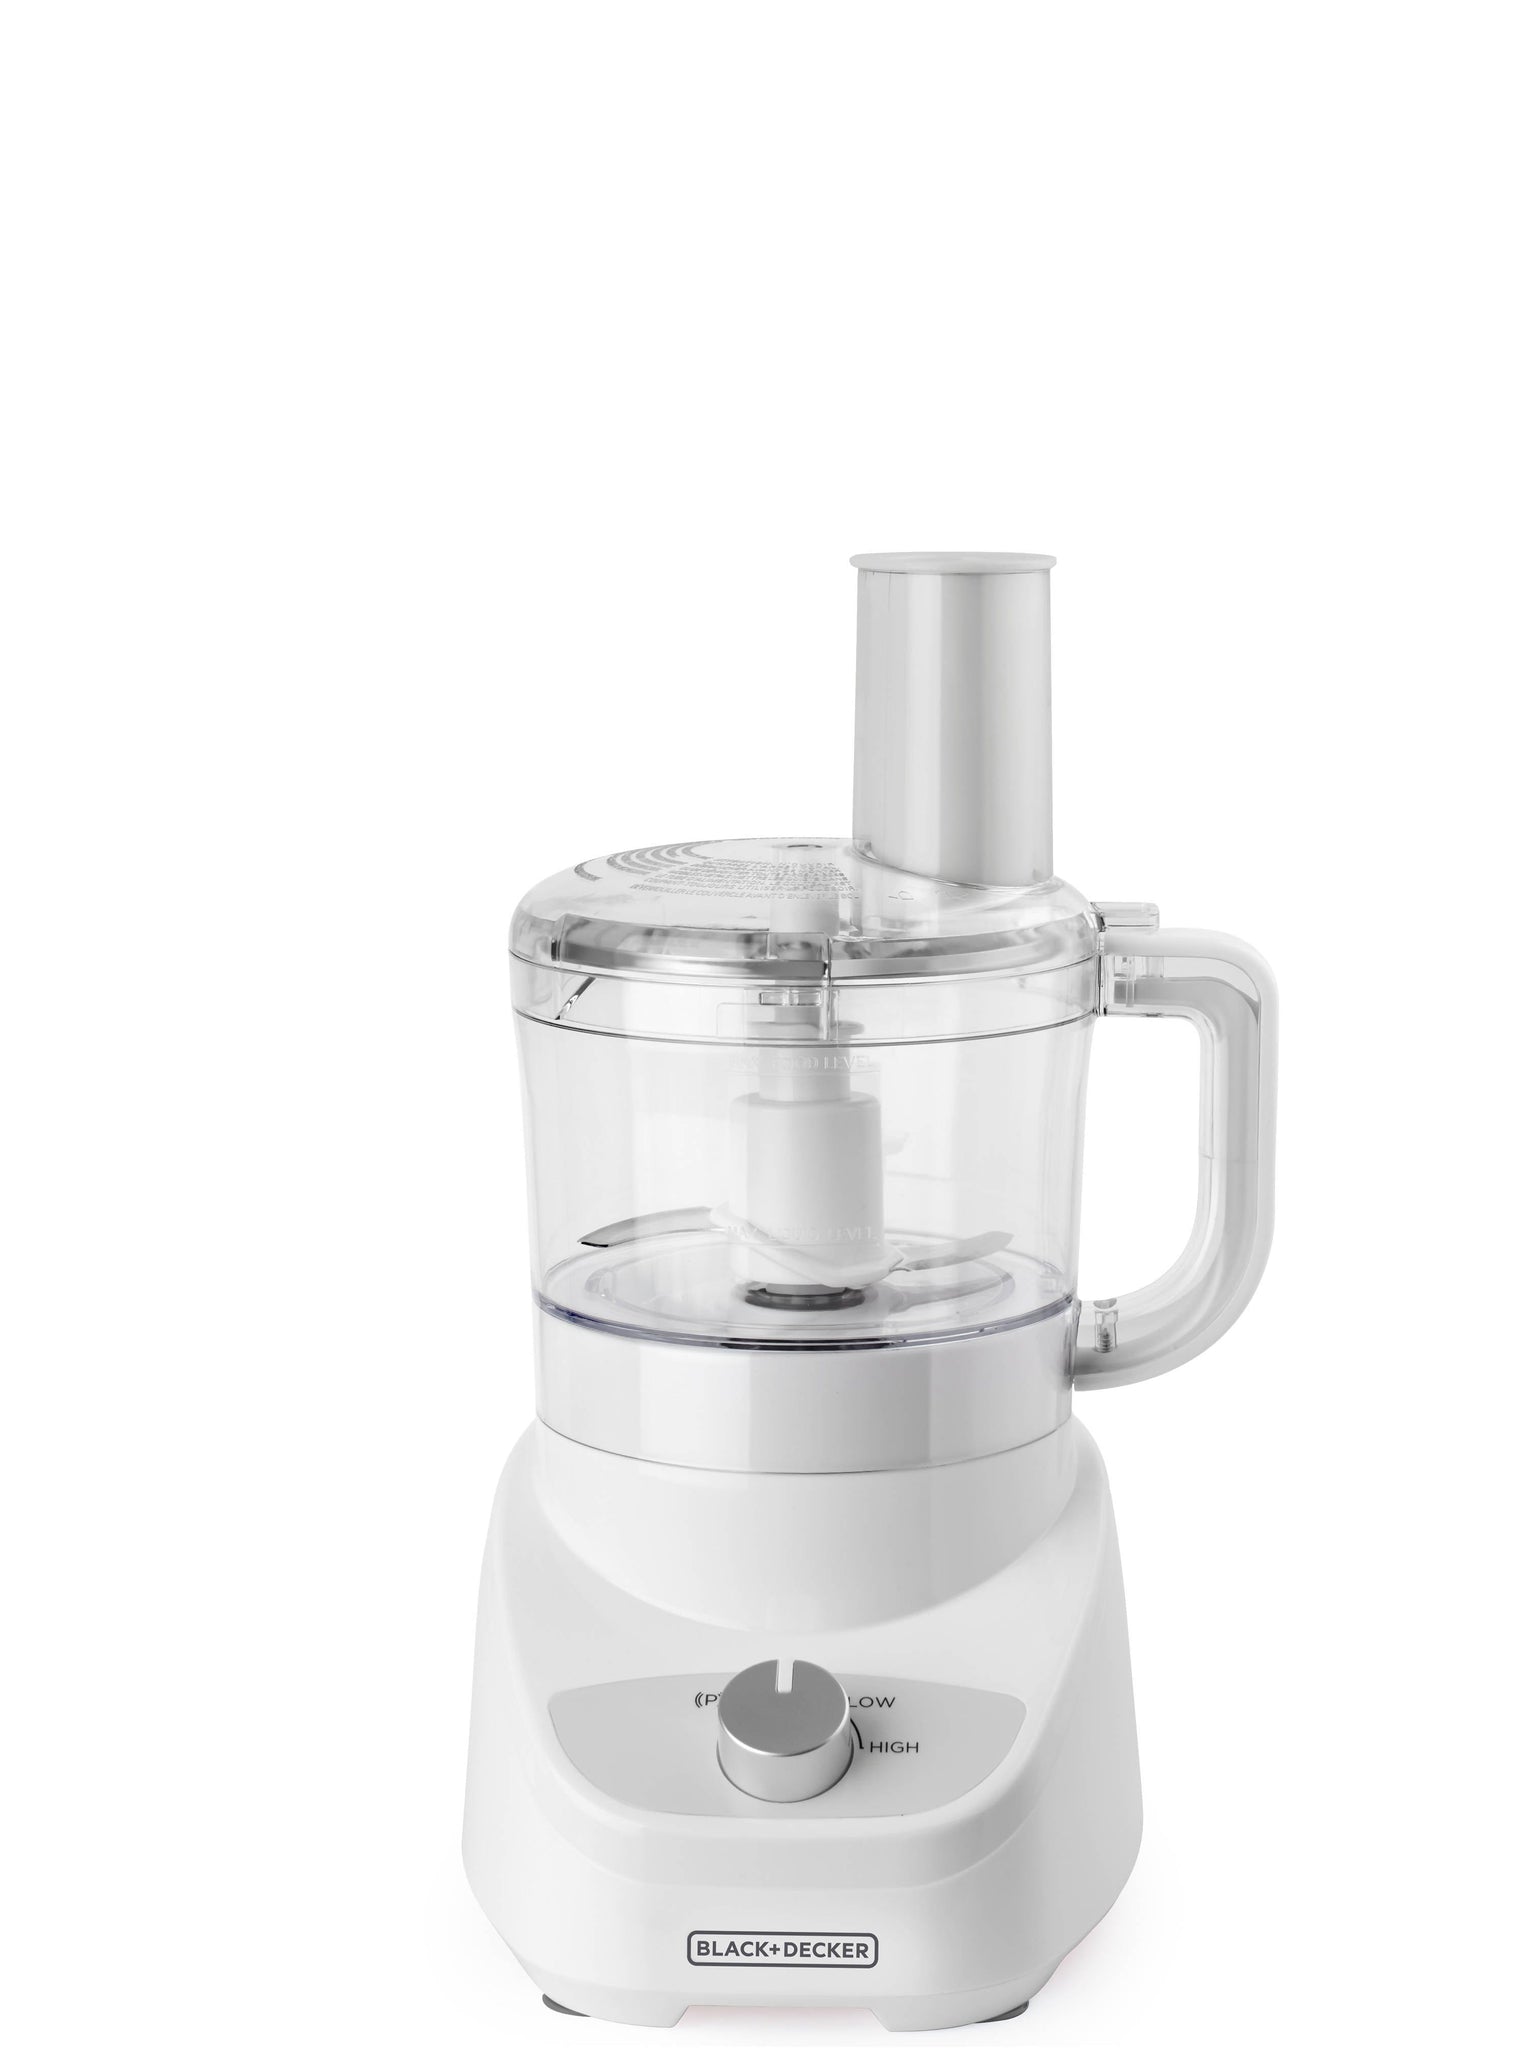 Black & Decker 8 Cup Food Processor #FP1337  It gives you the flexibility to slice, mince, shred, grate or puree, whether you need a lot or a little.- 05087582466